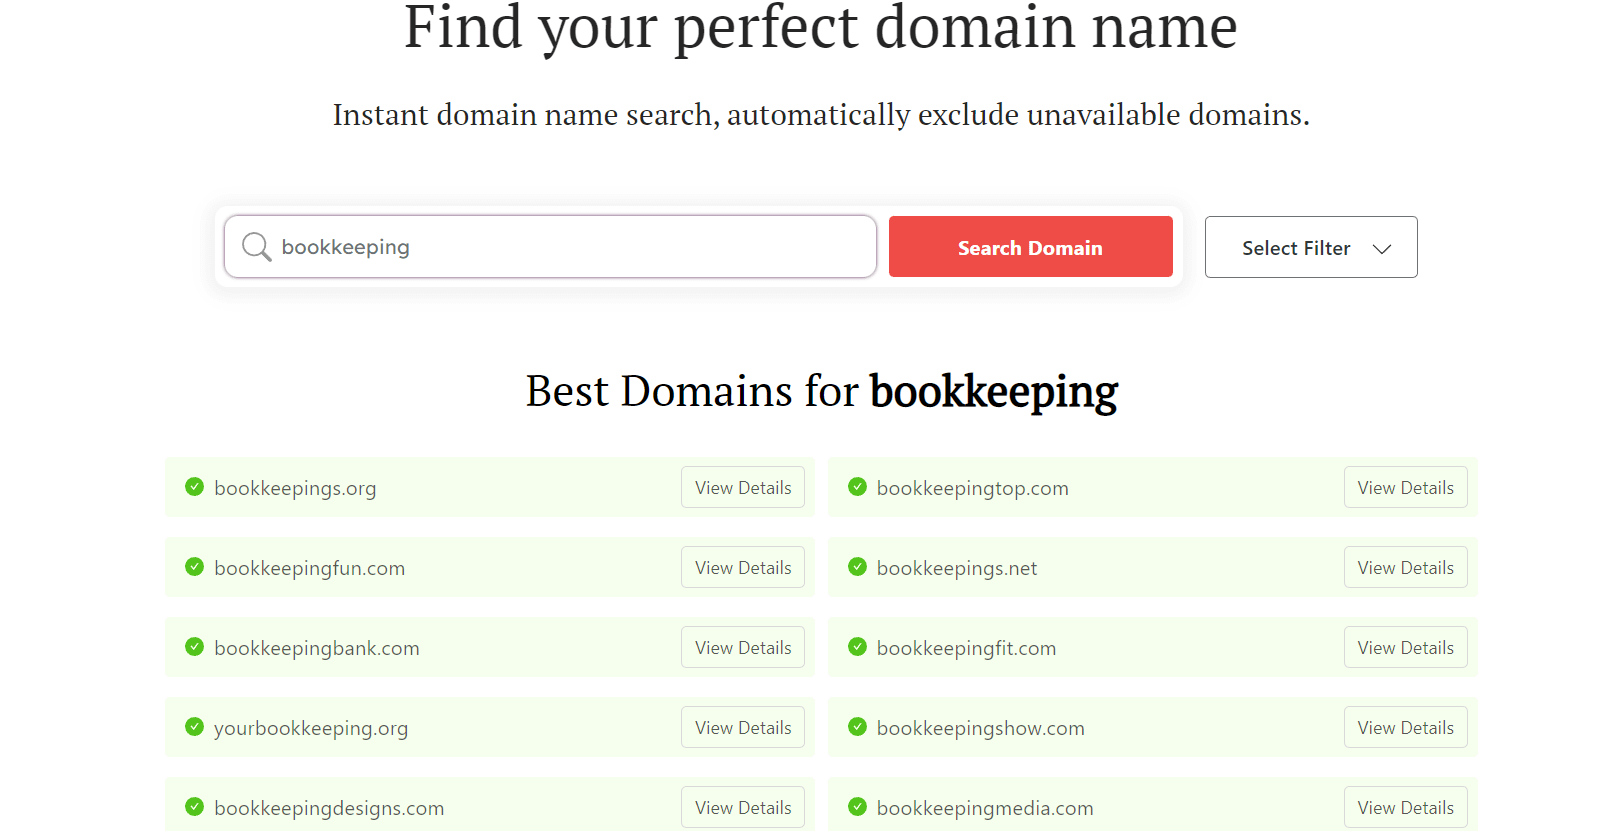 DomainWheel bookkeeper business names generator with search results for "Bookkeeping"